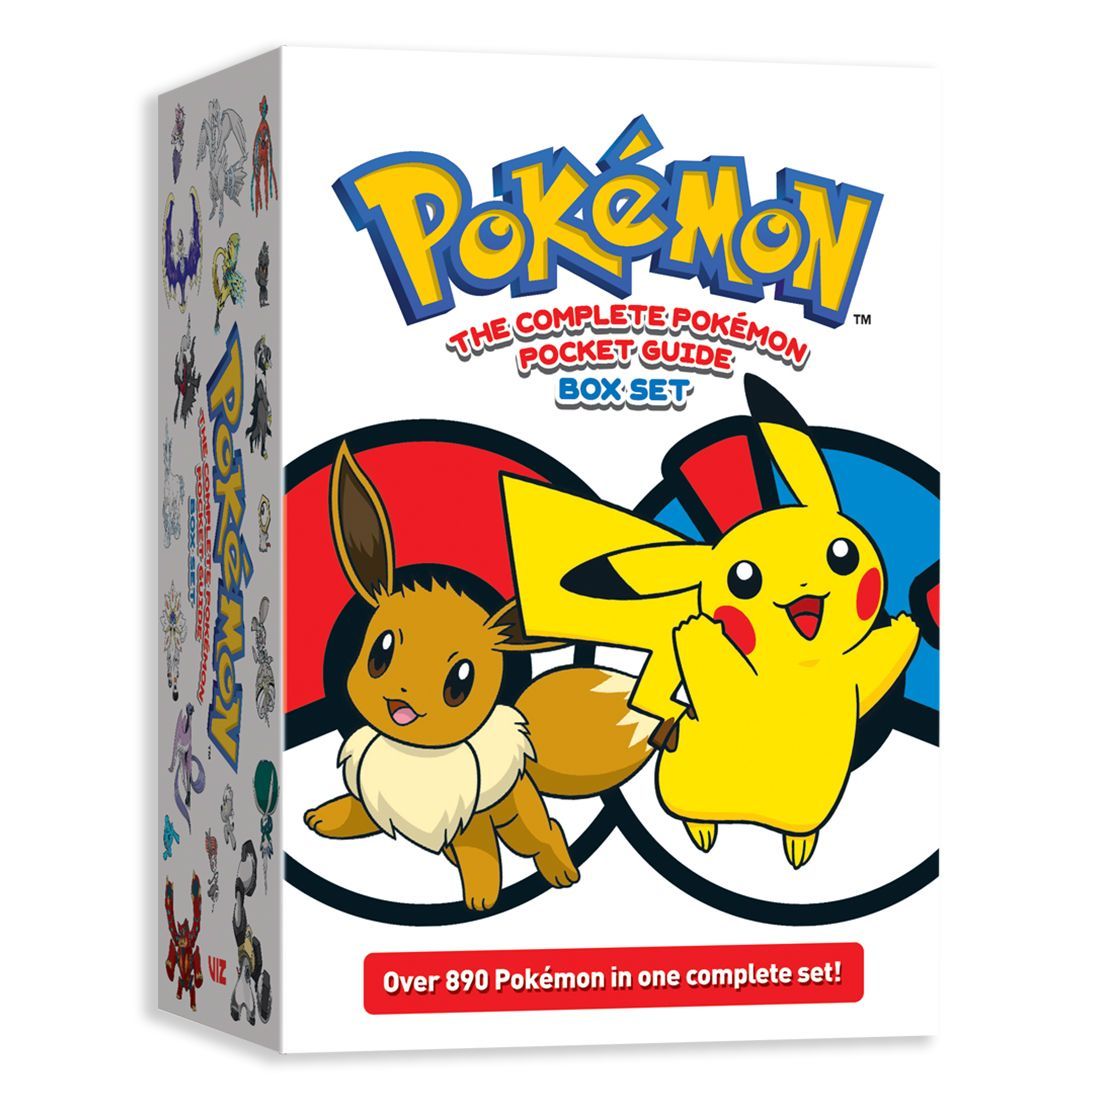 Amazon - The Complete Pokémon Pocket Guide Box Set - $38.99 (Pre-Order) amzn.to/3Qyr21N Ships from and sold by Amazon #ad Discord: bit.ly/3RvqtET